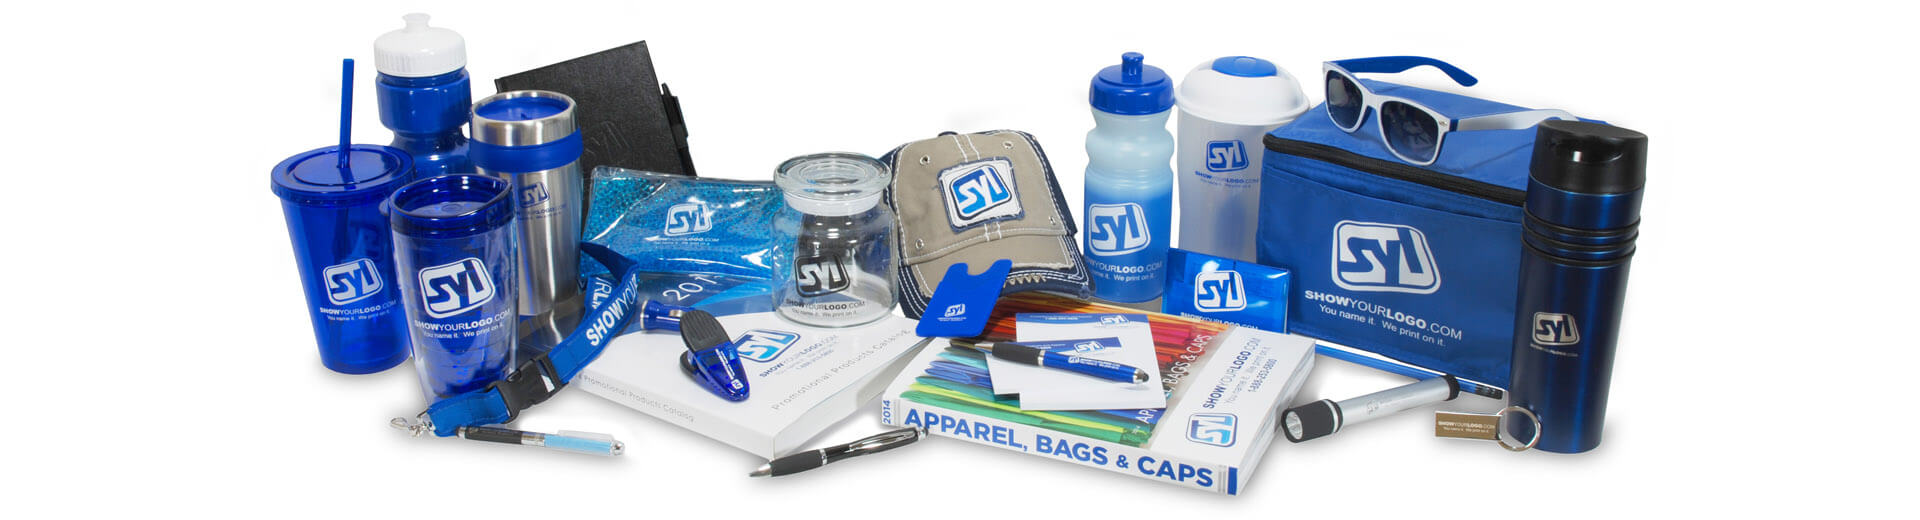 Promotional product samples